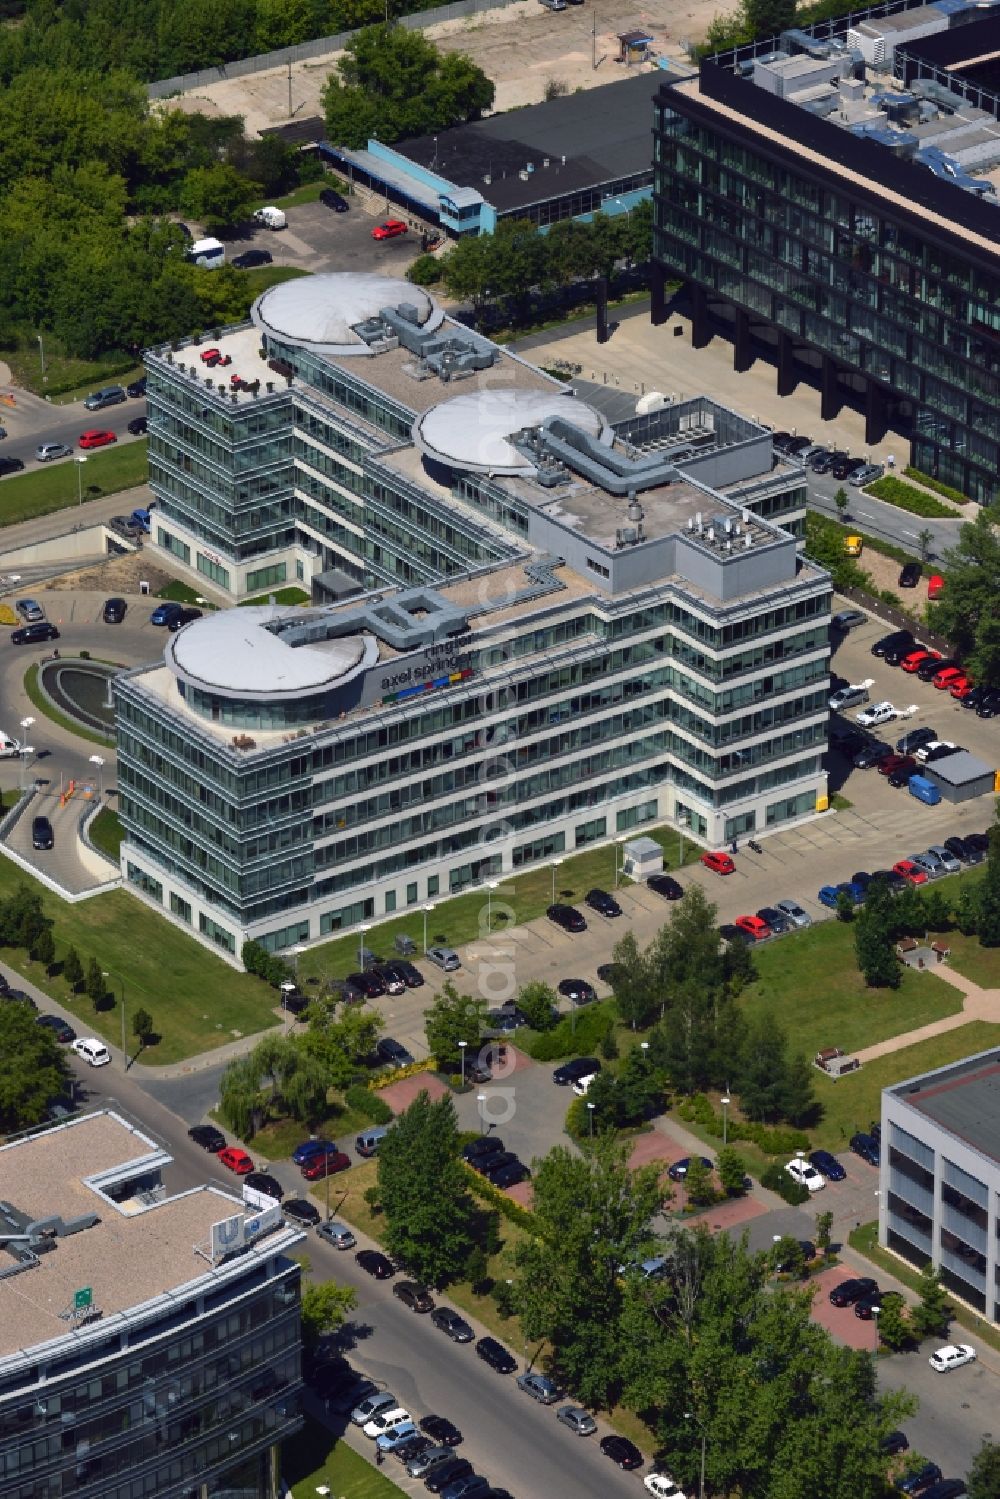 Warschau from the bird's eye view: The headquarters of Ringier Axel Springer Media AG in the Mokotow district of Warsaw in Poland. The joint venture of the German and Swiss publishing houses has been created in 2010 and is located in the rectangular building in the Southwest of the district. The facility is surrounded by other office low rise buildings in the Sluzewiec part of the district